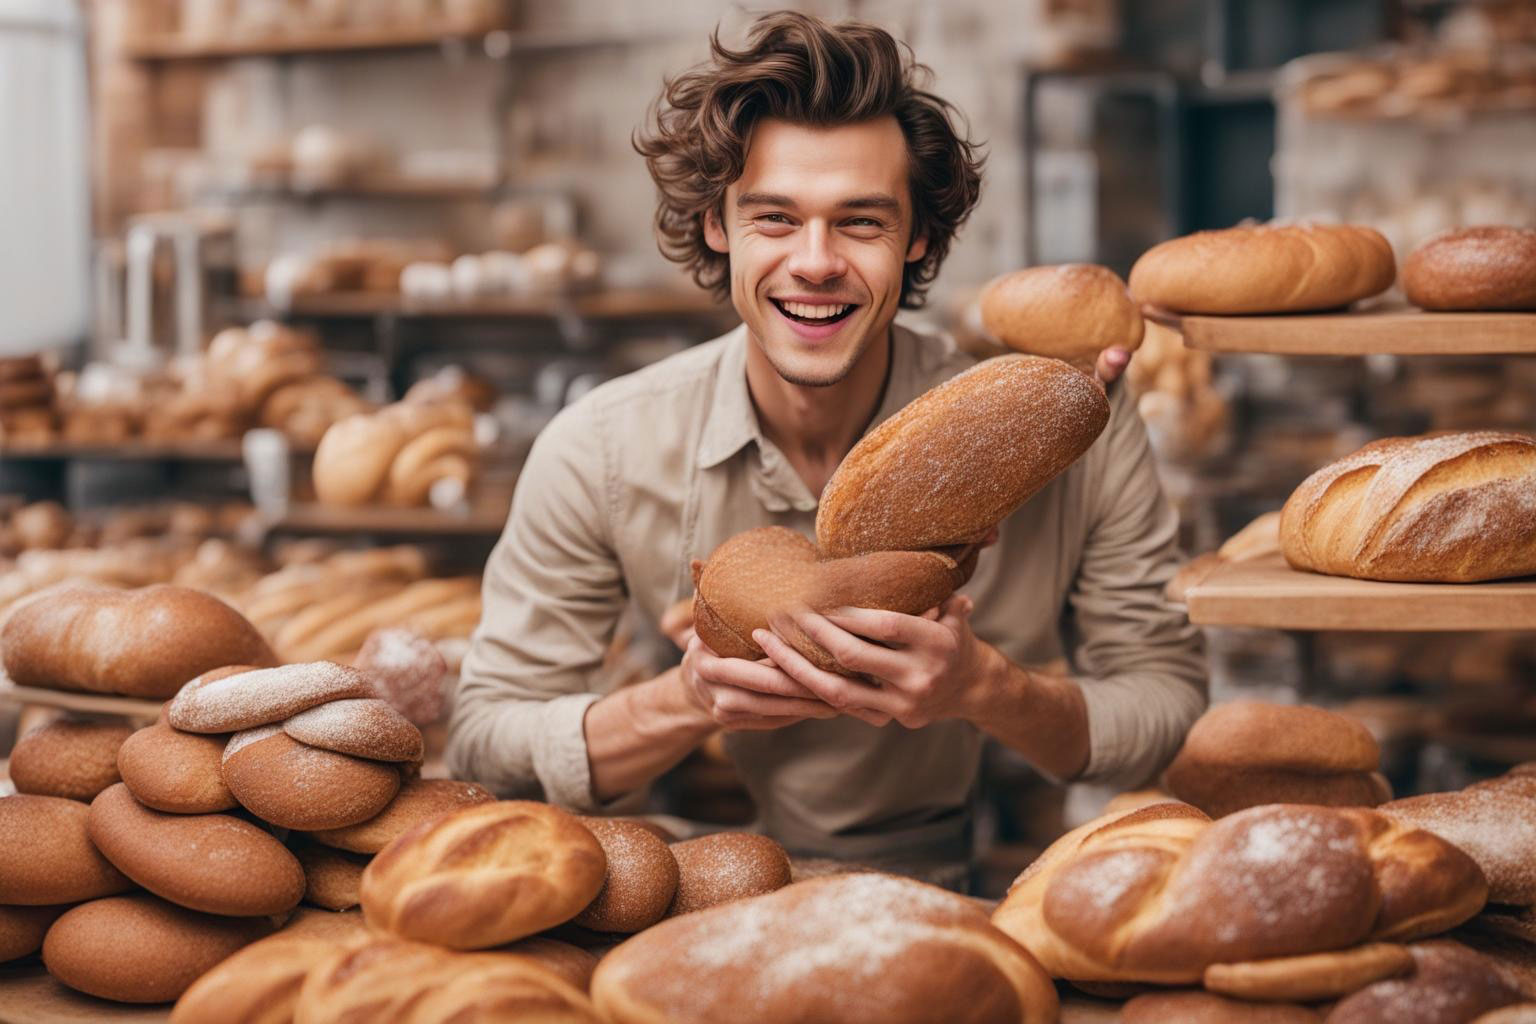 You got 16 out of 24! The Ultimate Bread Quiz! 🍞 Only Bread Lovers With Genius IQ Can Ace This Bread Trivia Quiz